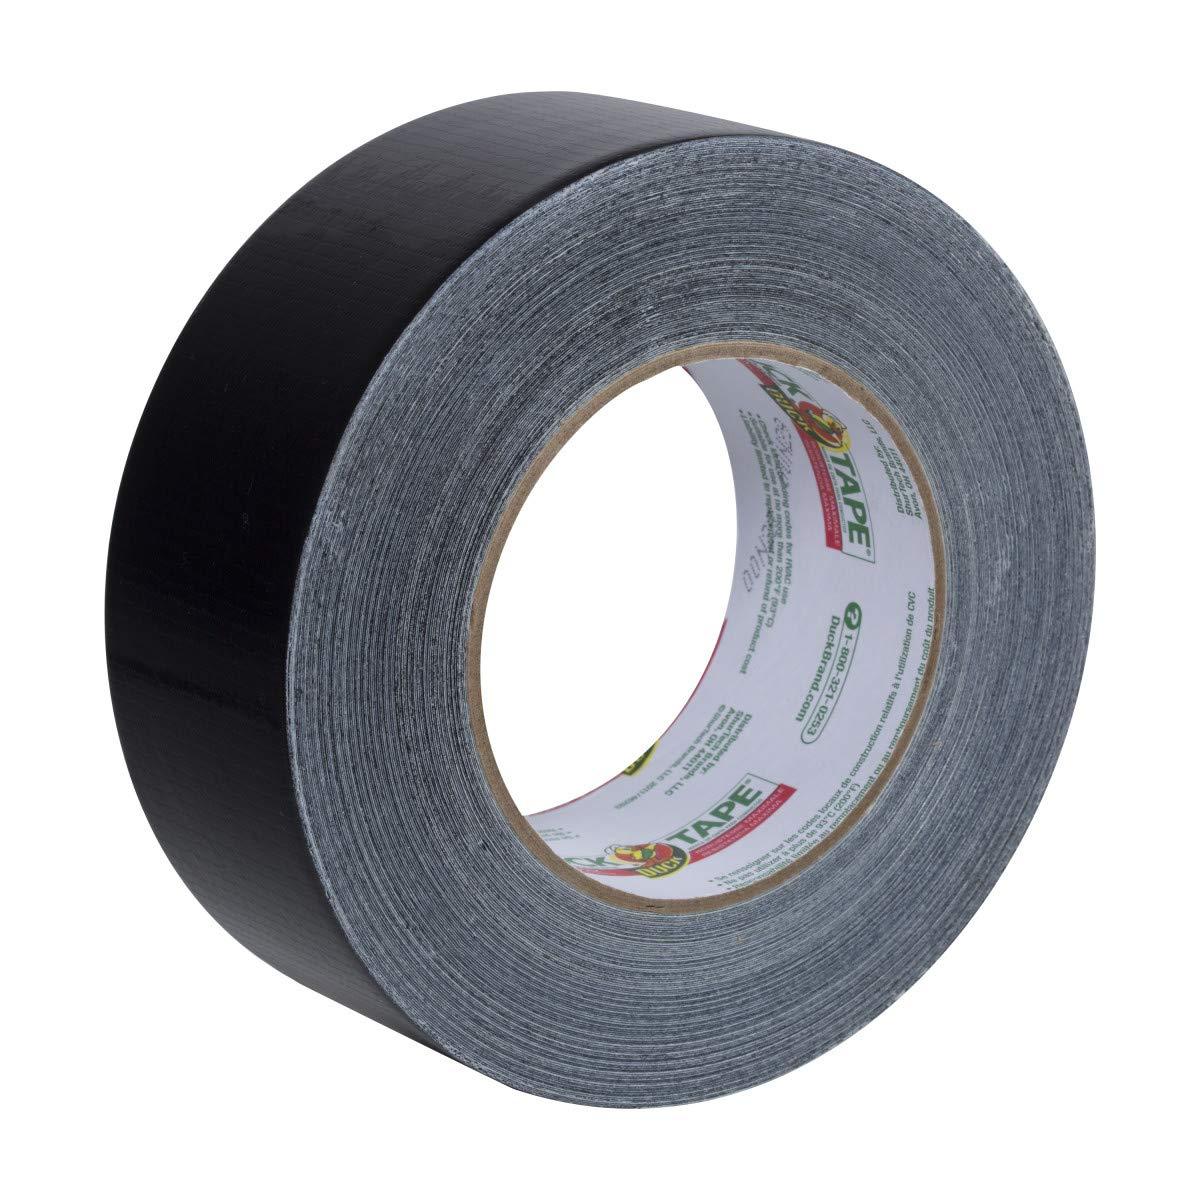  ADHES Duct Tape Duck Tape Black Waterproof Tape